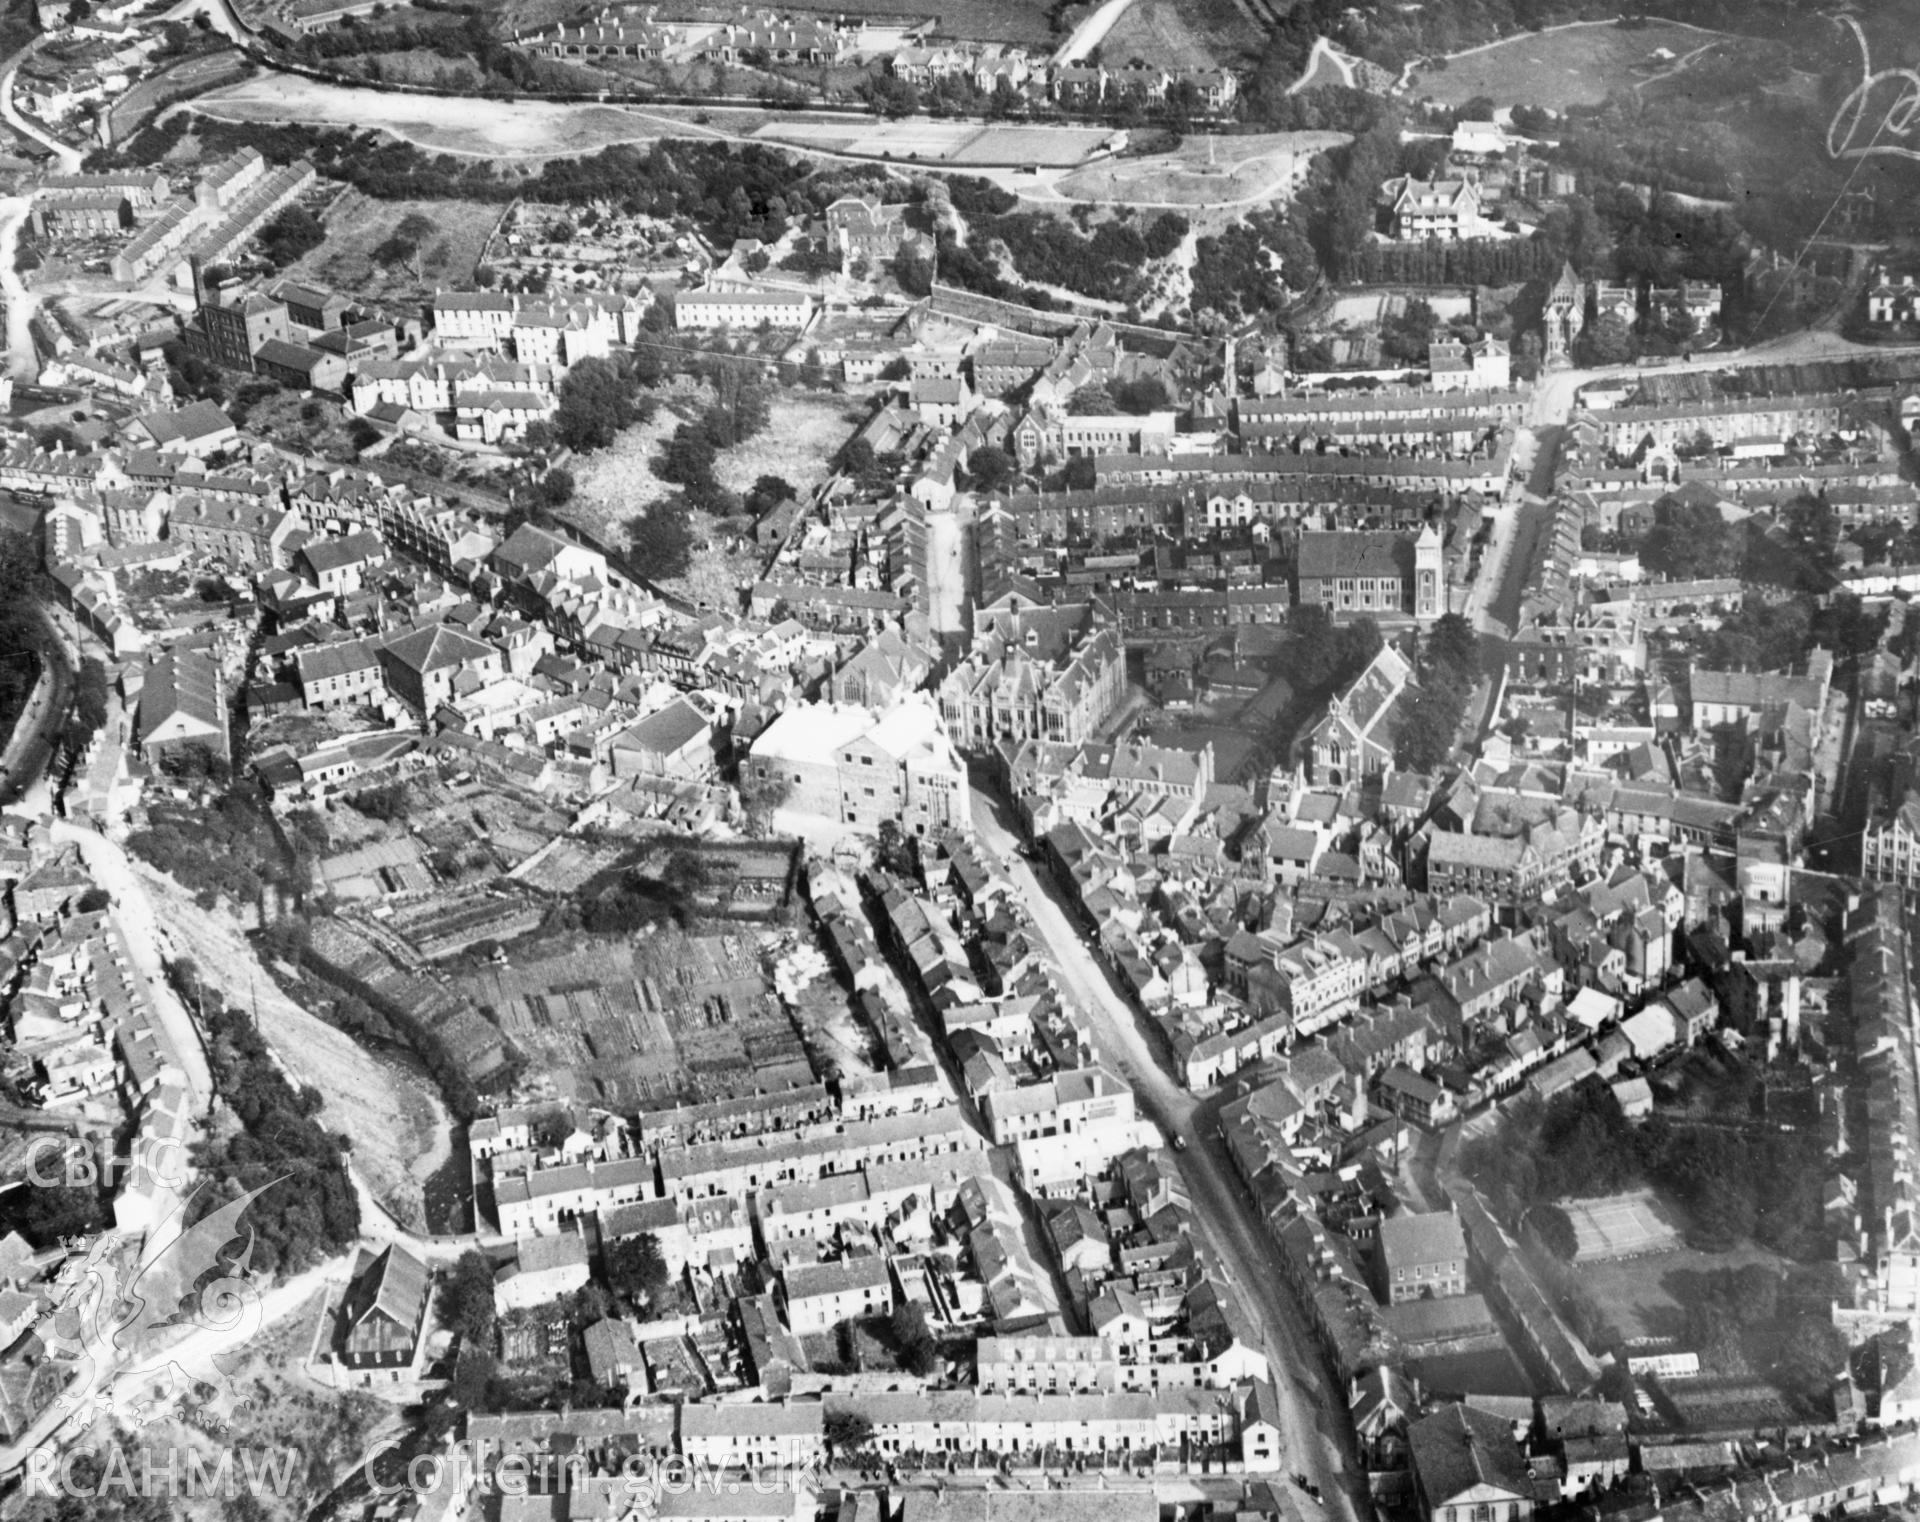 General view of Merthyr Tydfil. Oblique aerial photograph, 5?x4? BW glass plate.